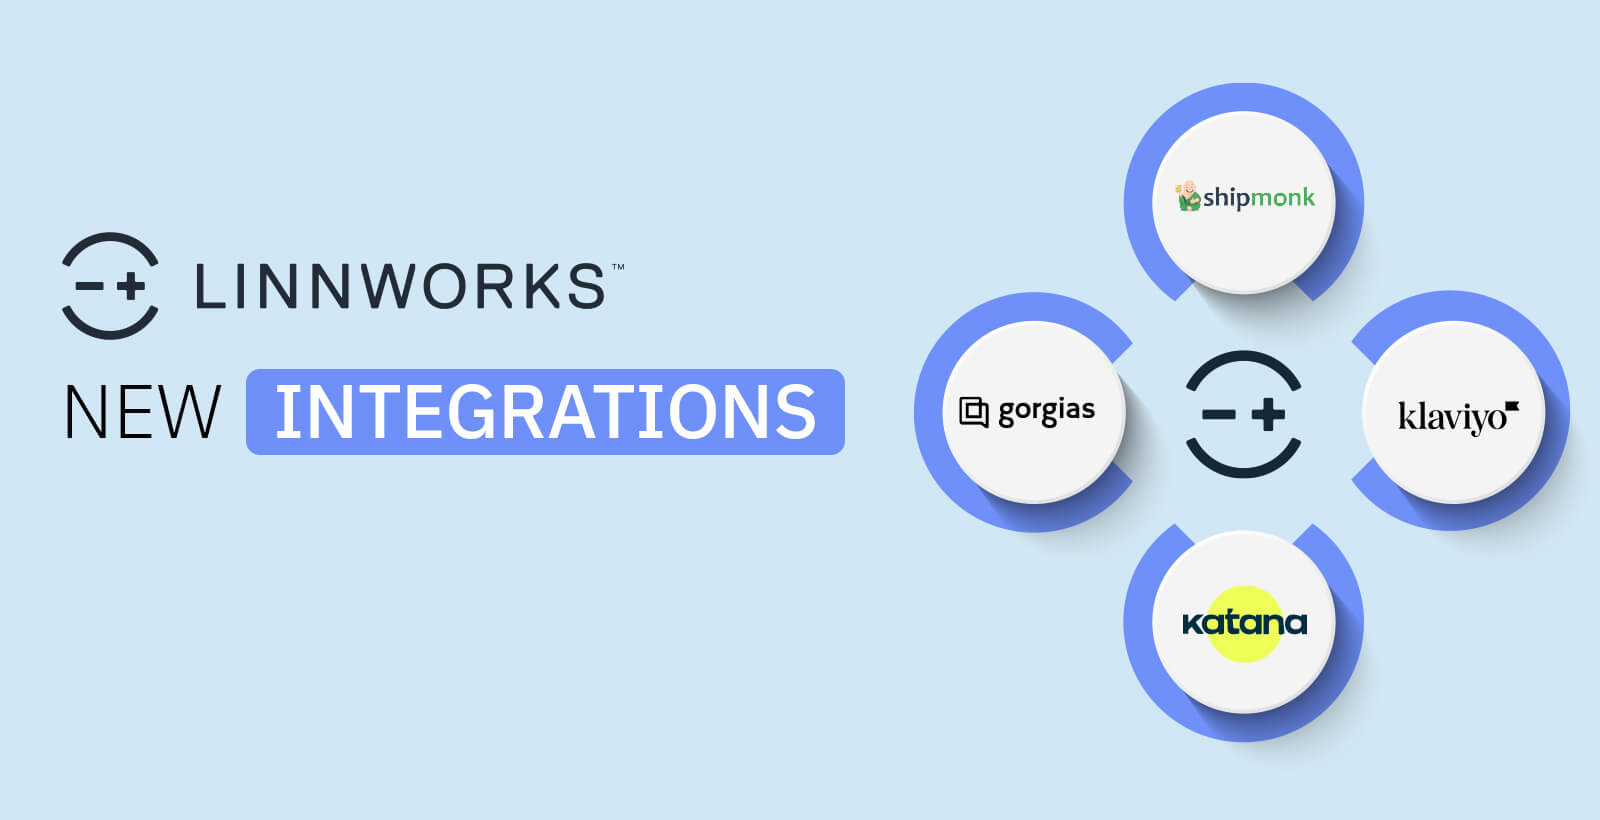 Press release announcement of Linnworks' integrations